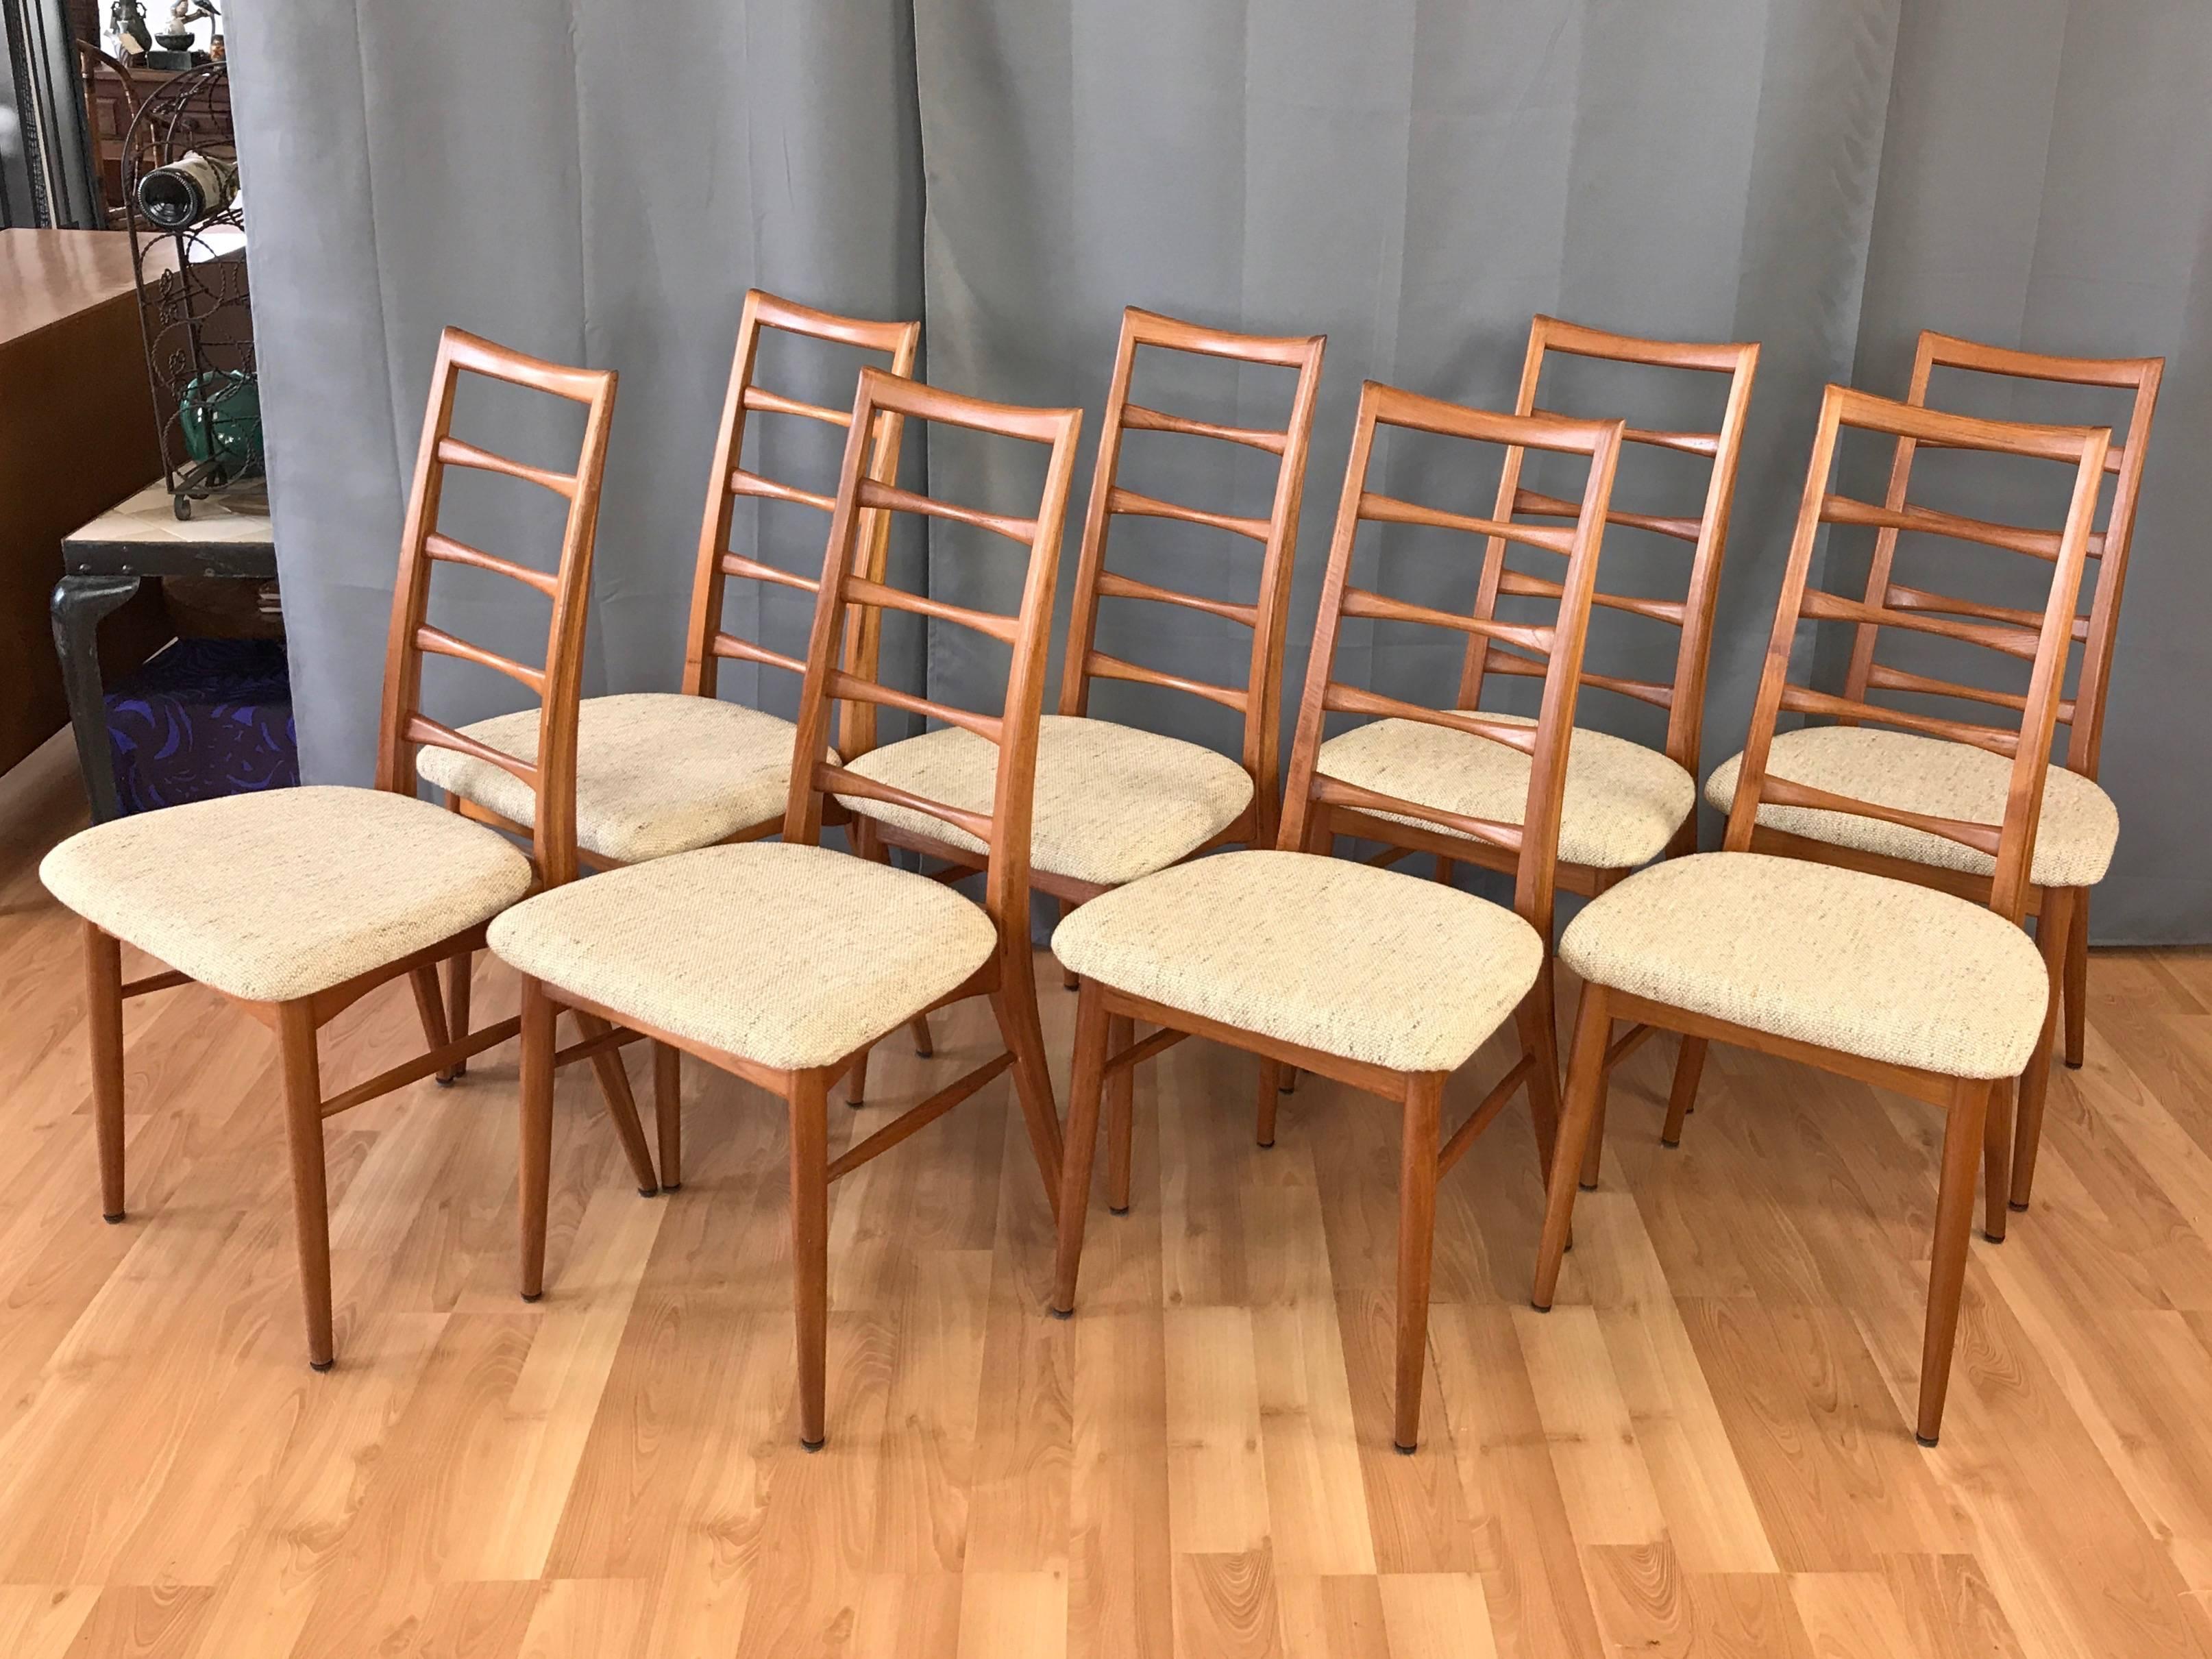 A set of eight Danish “Lis” ladder back teak dining chairs by Niels Kofoed for Koefoeds Hornslet.

Sculptural solid teak frame defined by a gracefully arced bentwood back with bone-shaped slats, their classic mid-century modern lines being echoed